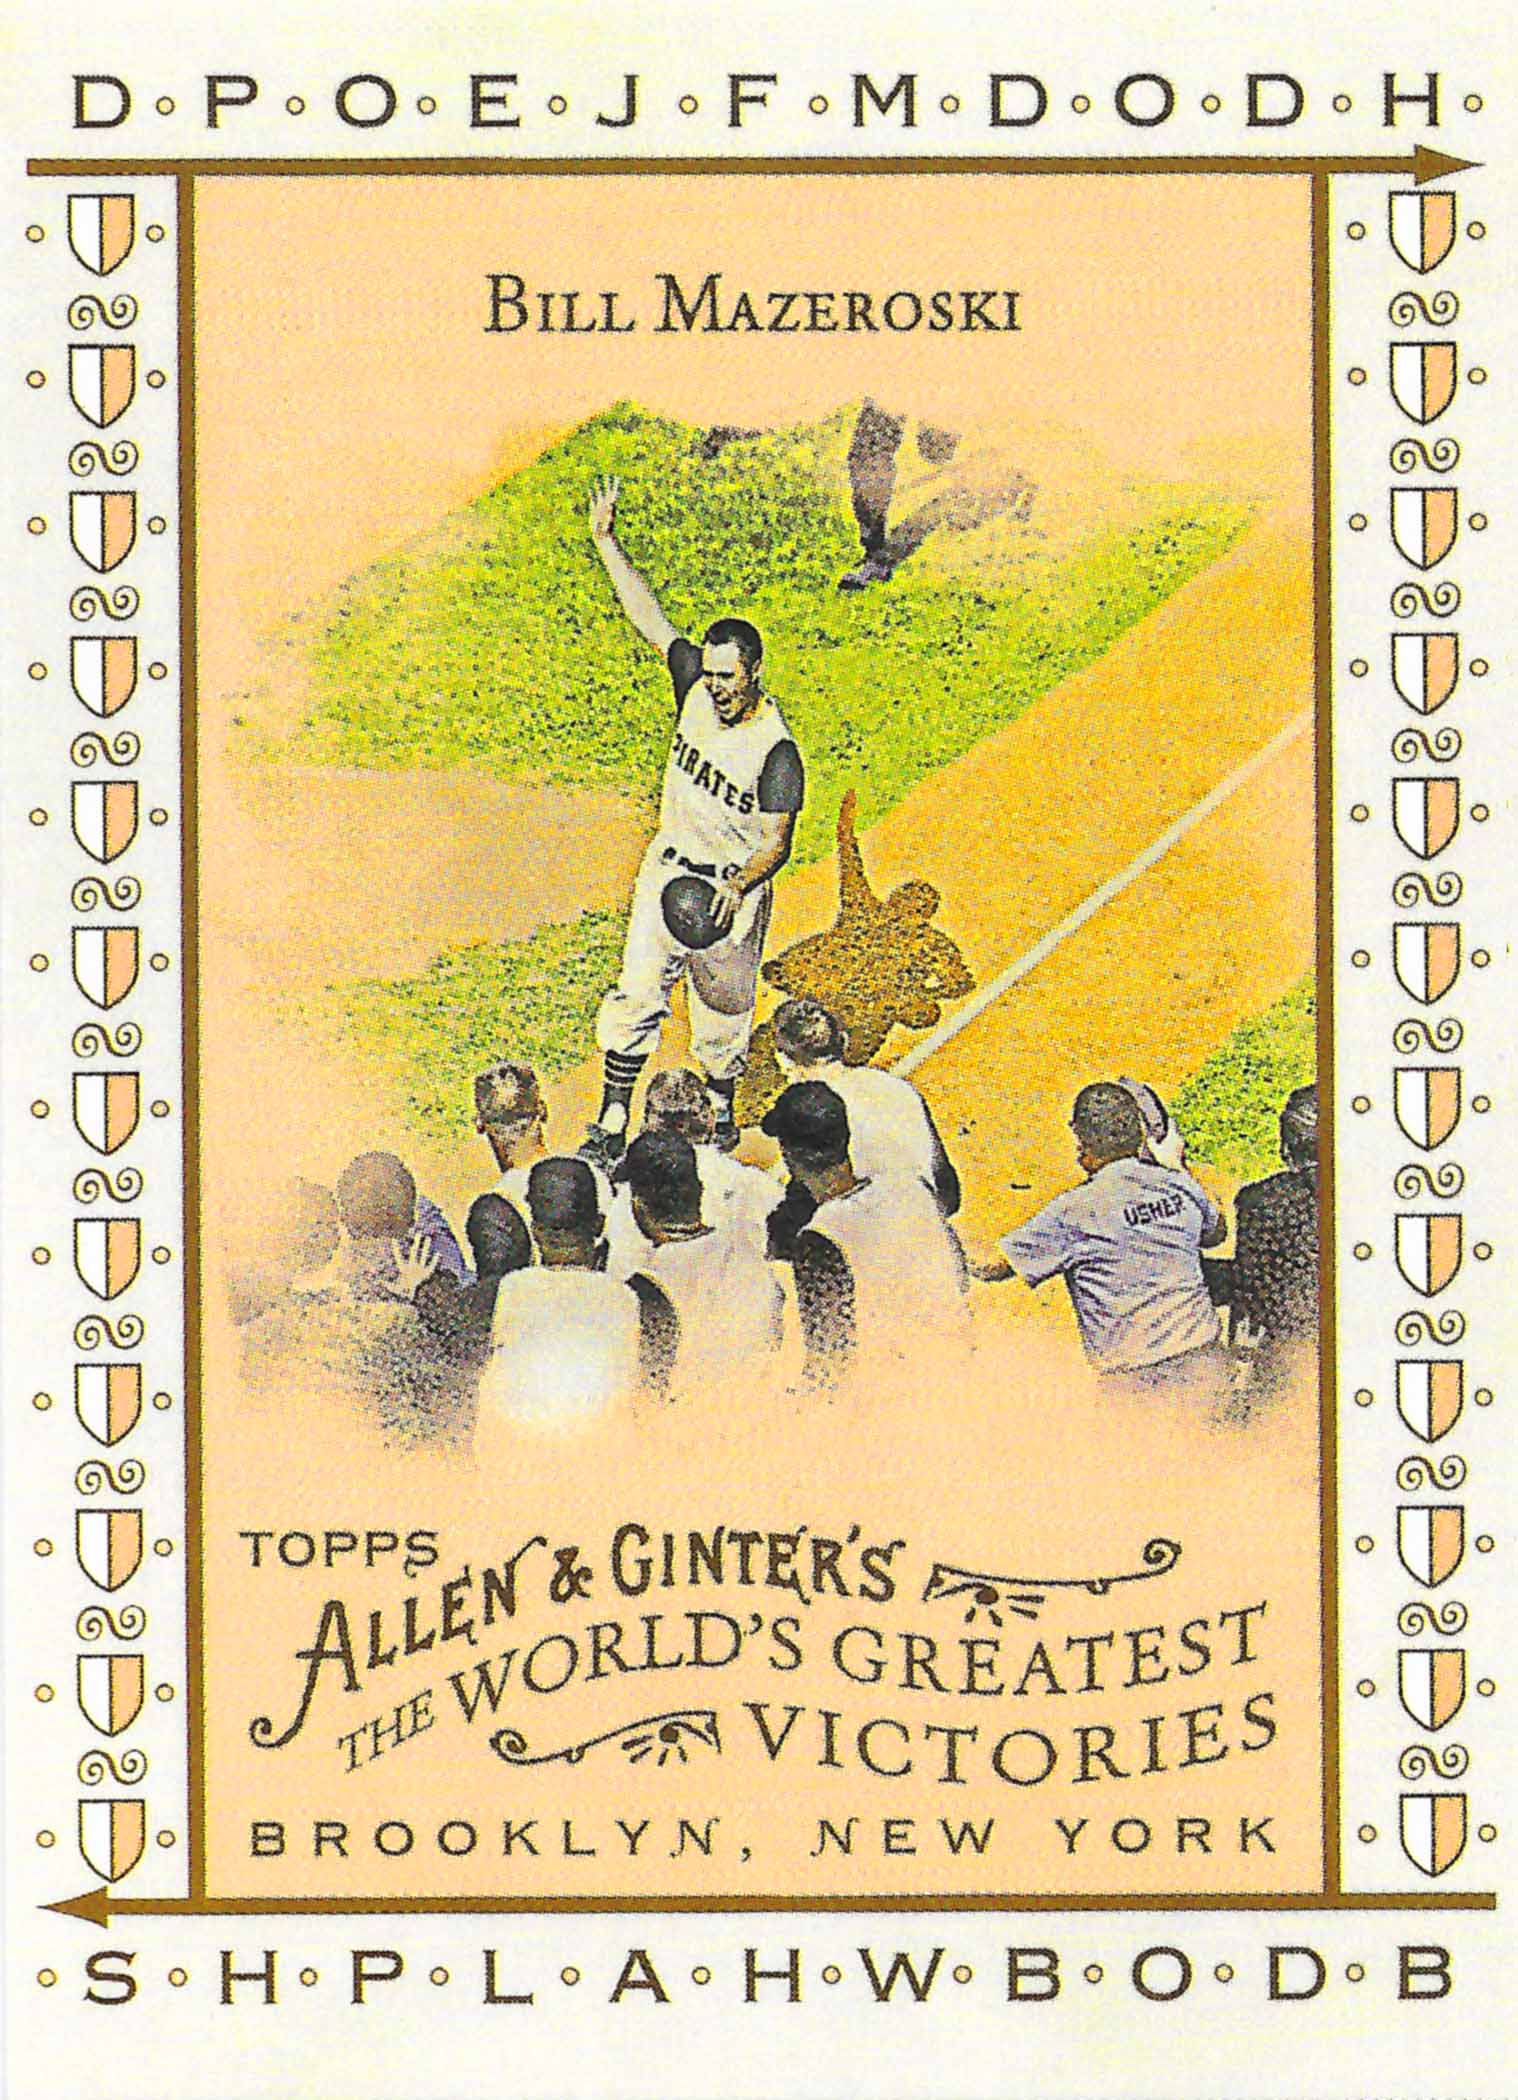 2008 Topps Allen and Ginter World's Greatest Victories